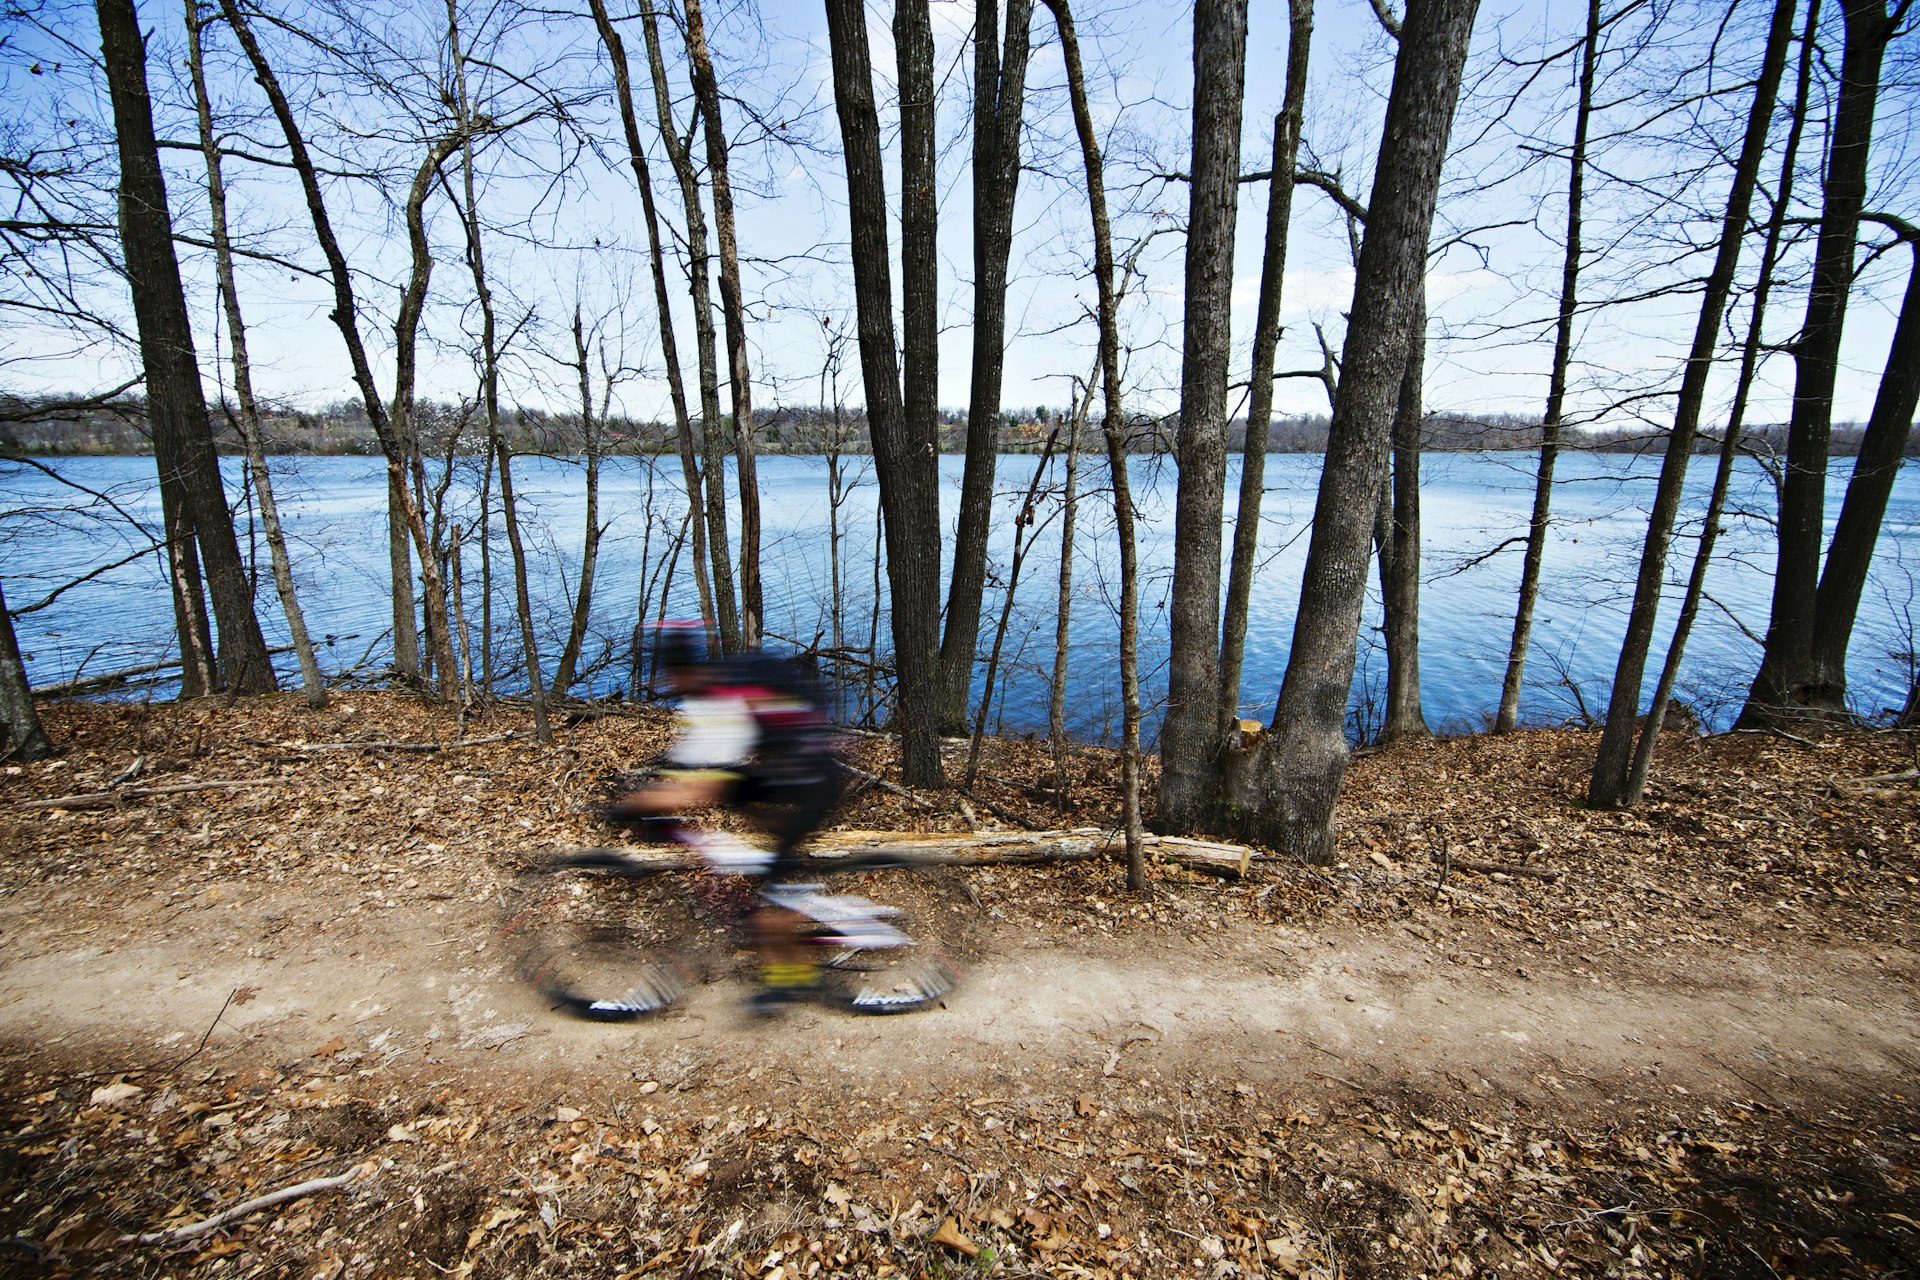 A mountain biker is blurred as they speed along a tree-lined woodland path near a lake in the Ozarks